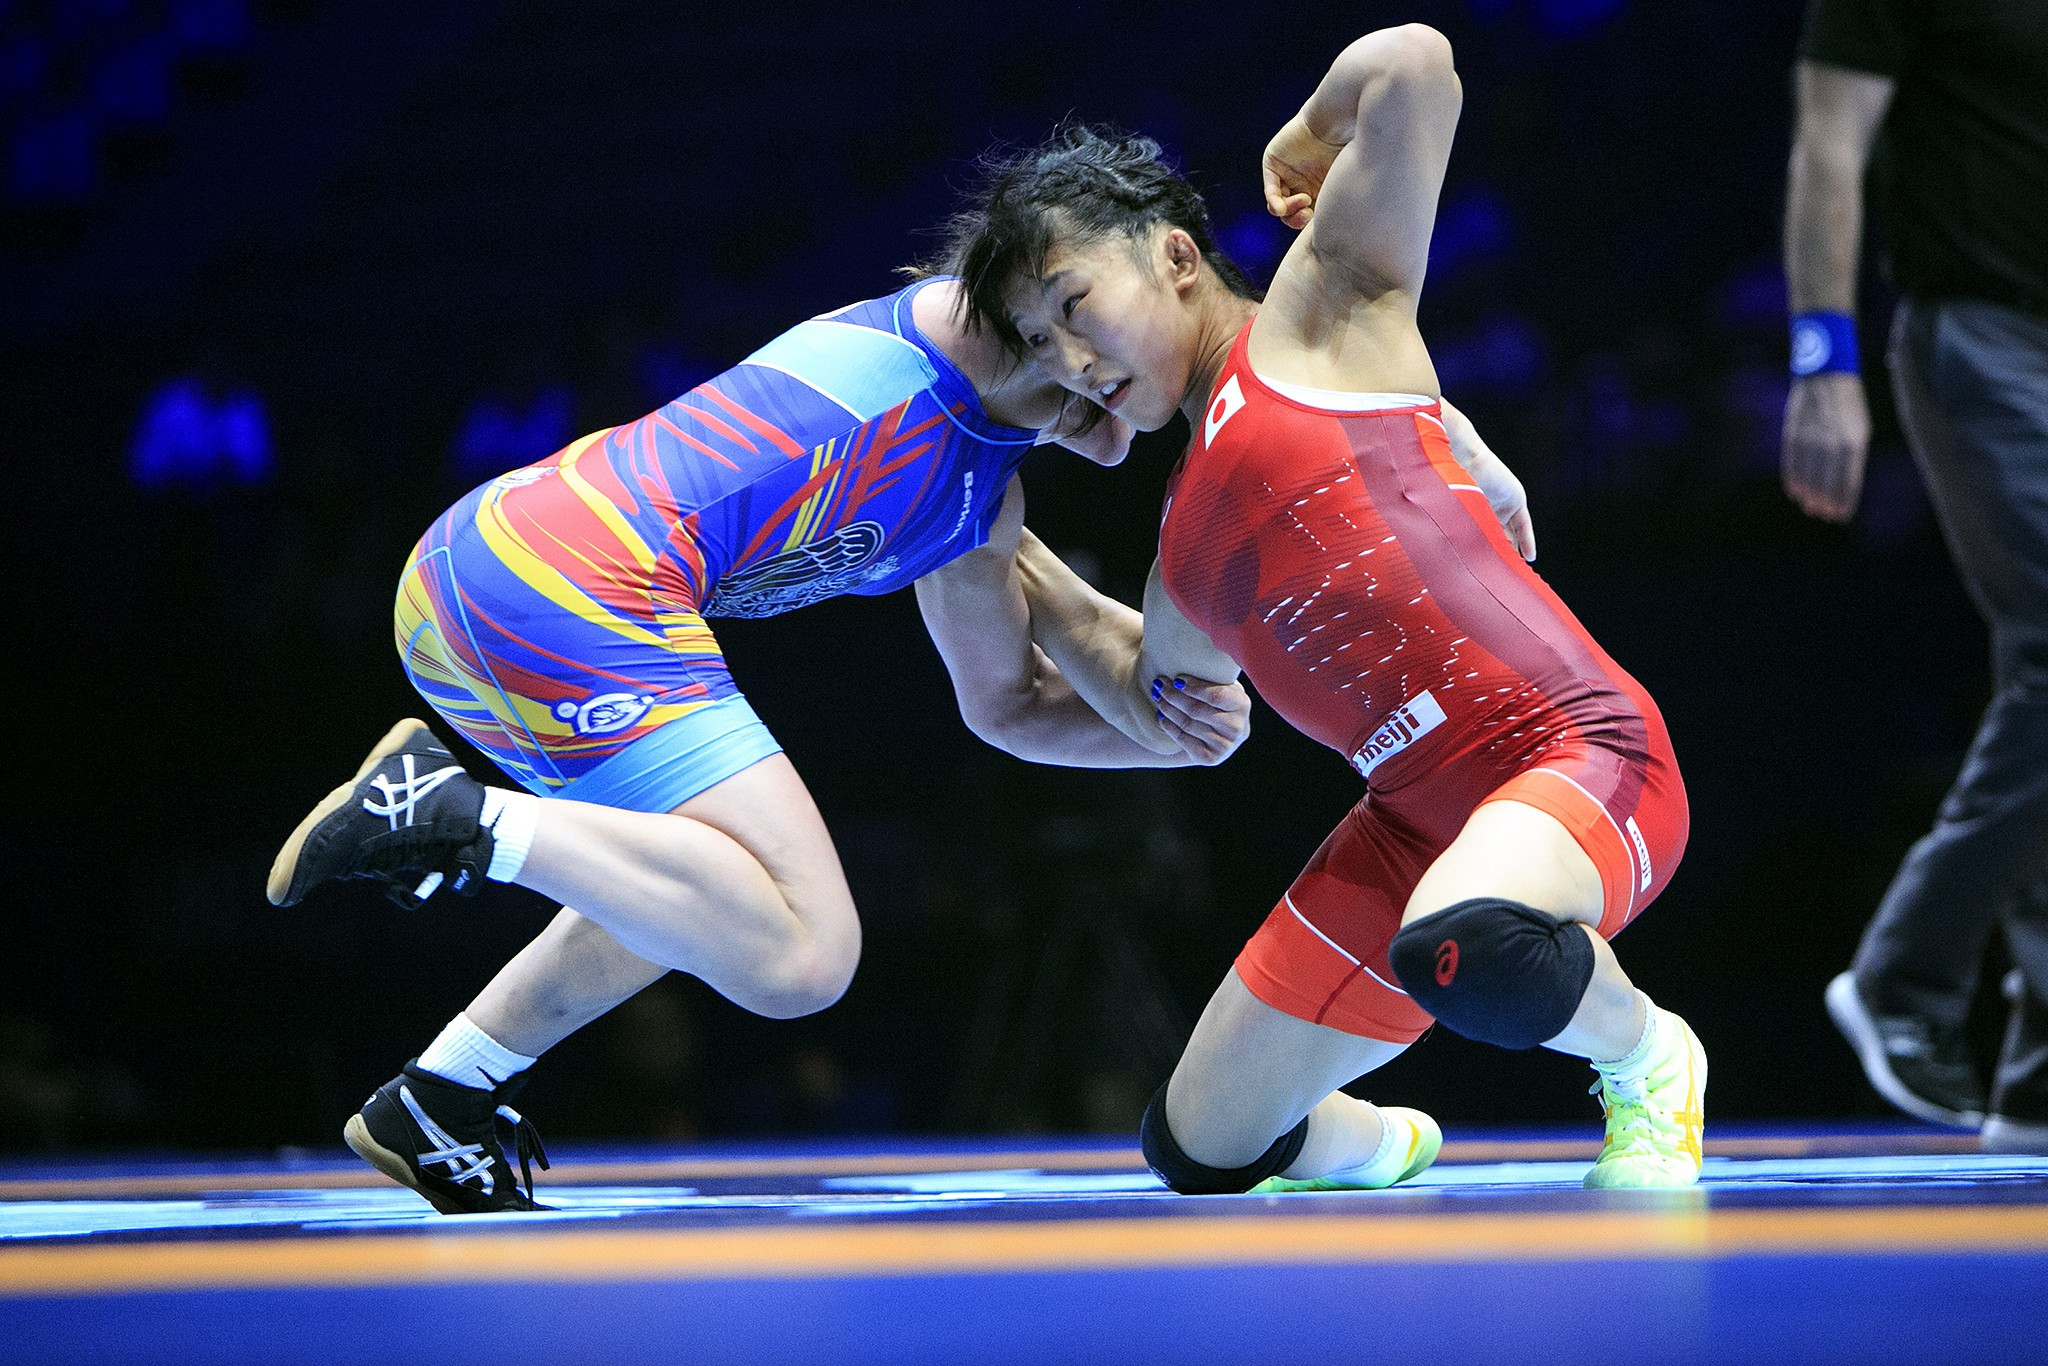 Yui Susaki was the other Japanese wrestler to claim a gold medal on the fourth day of competition ©UWW